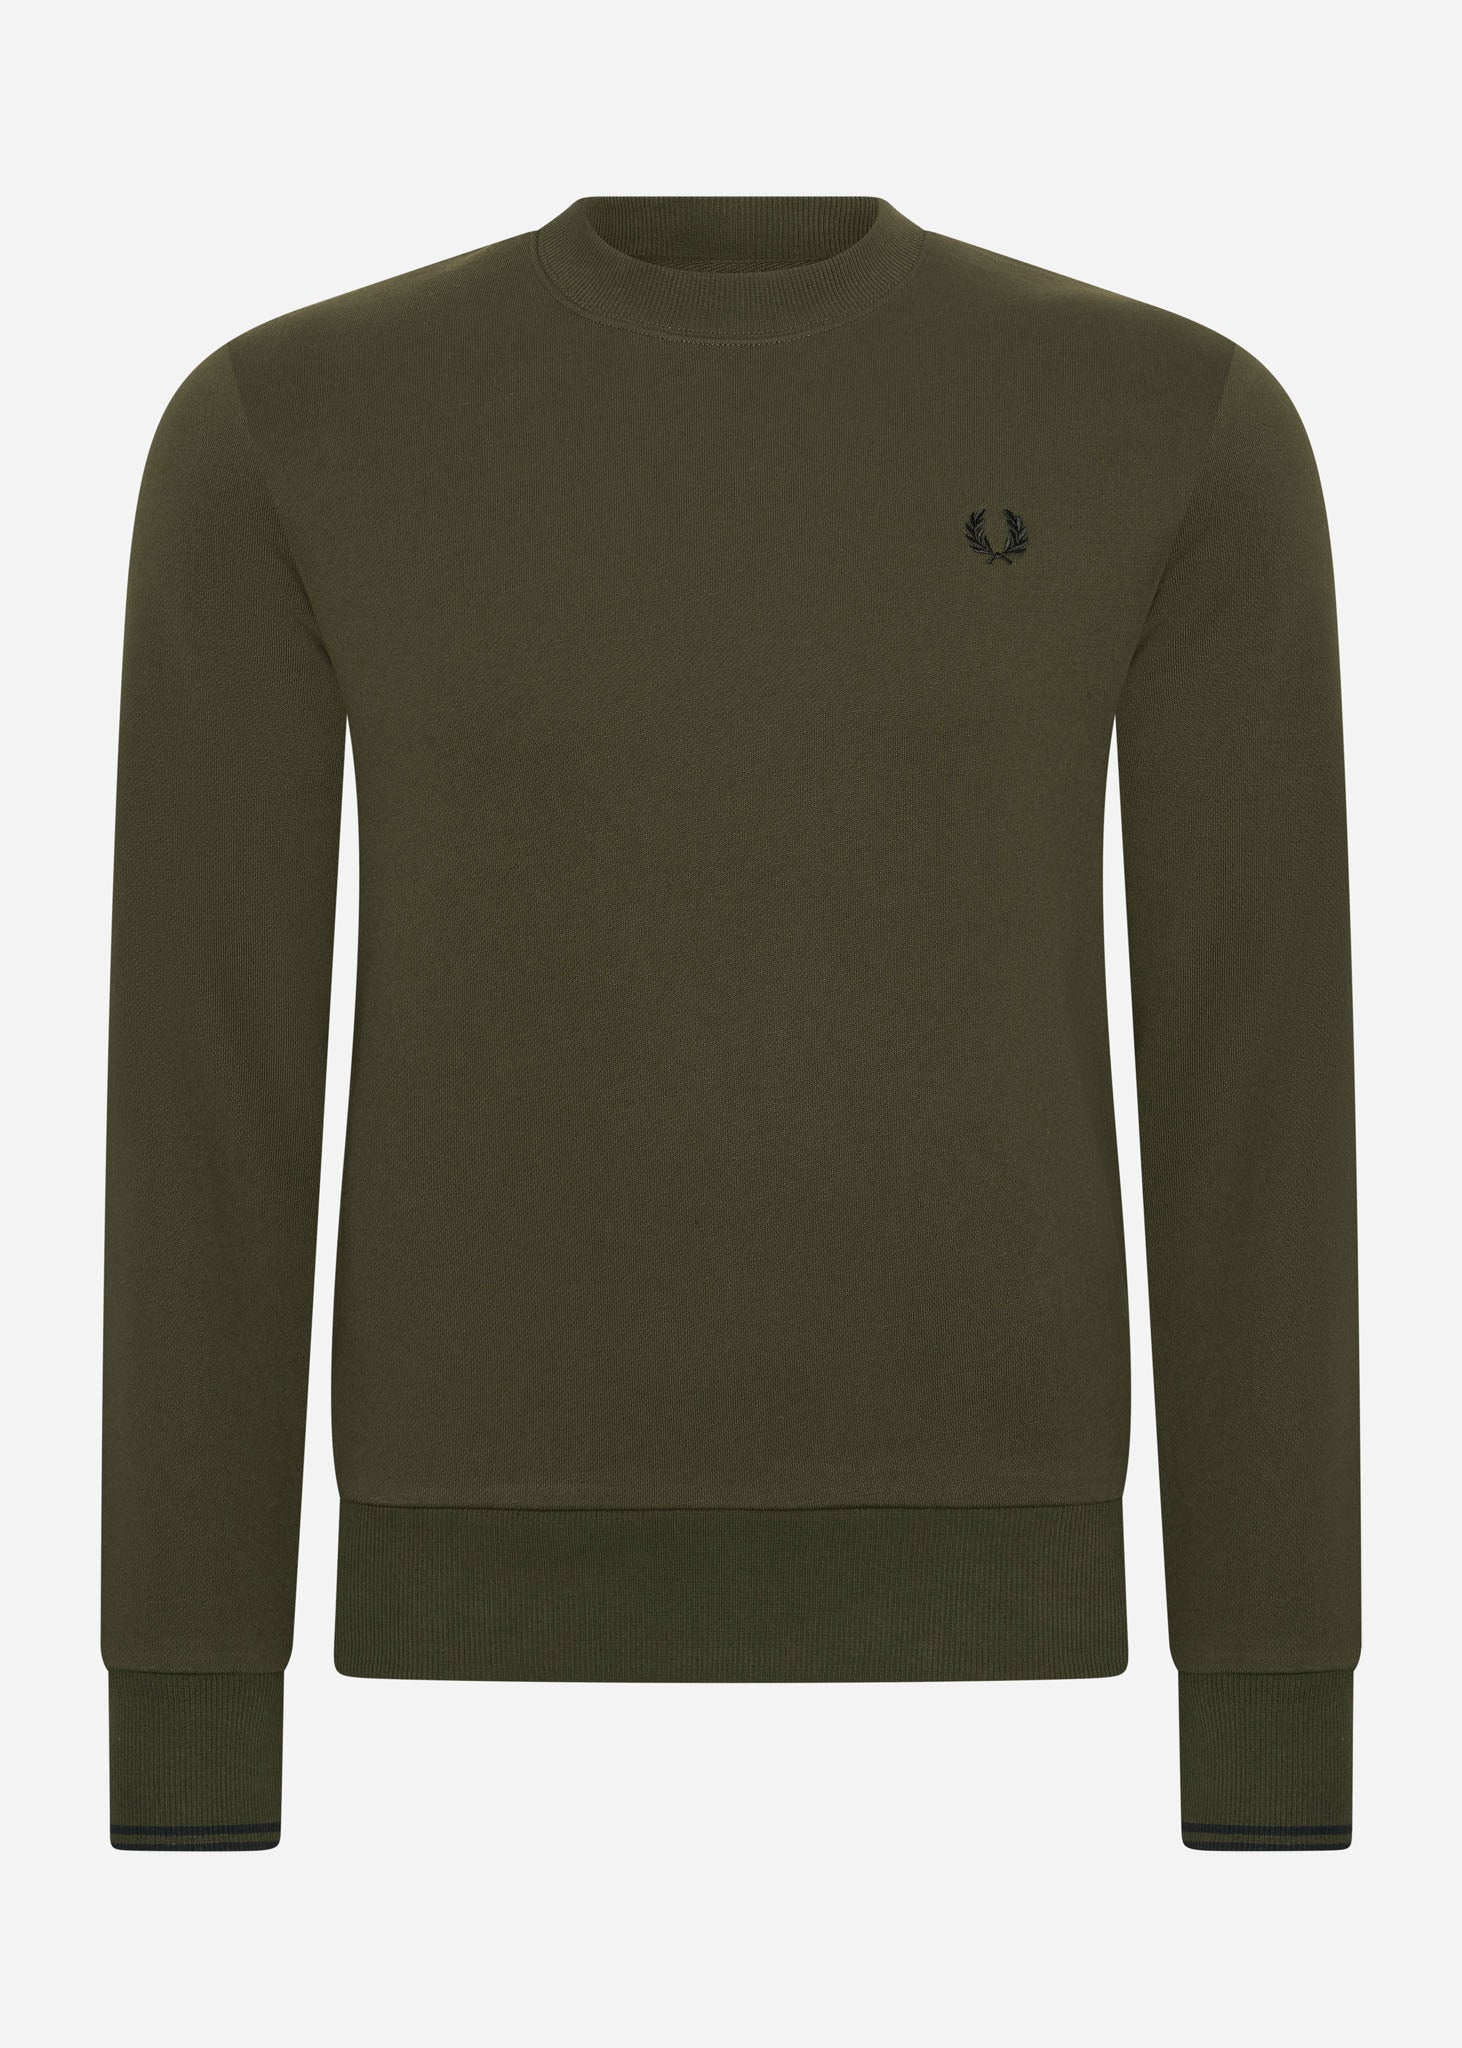 fred perry trui groen donker 